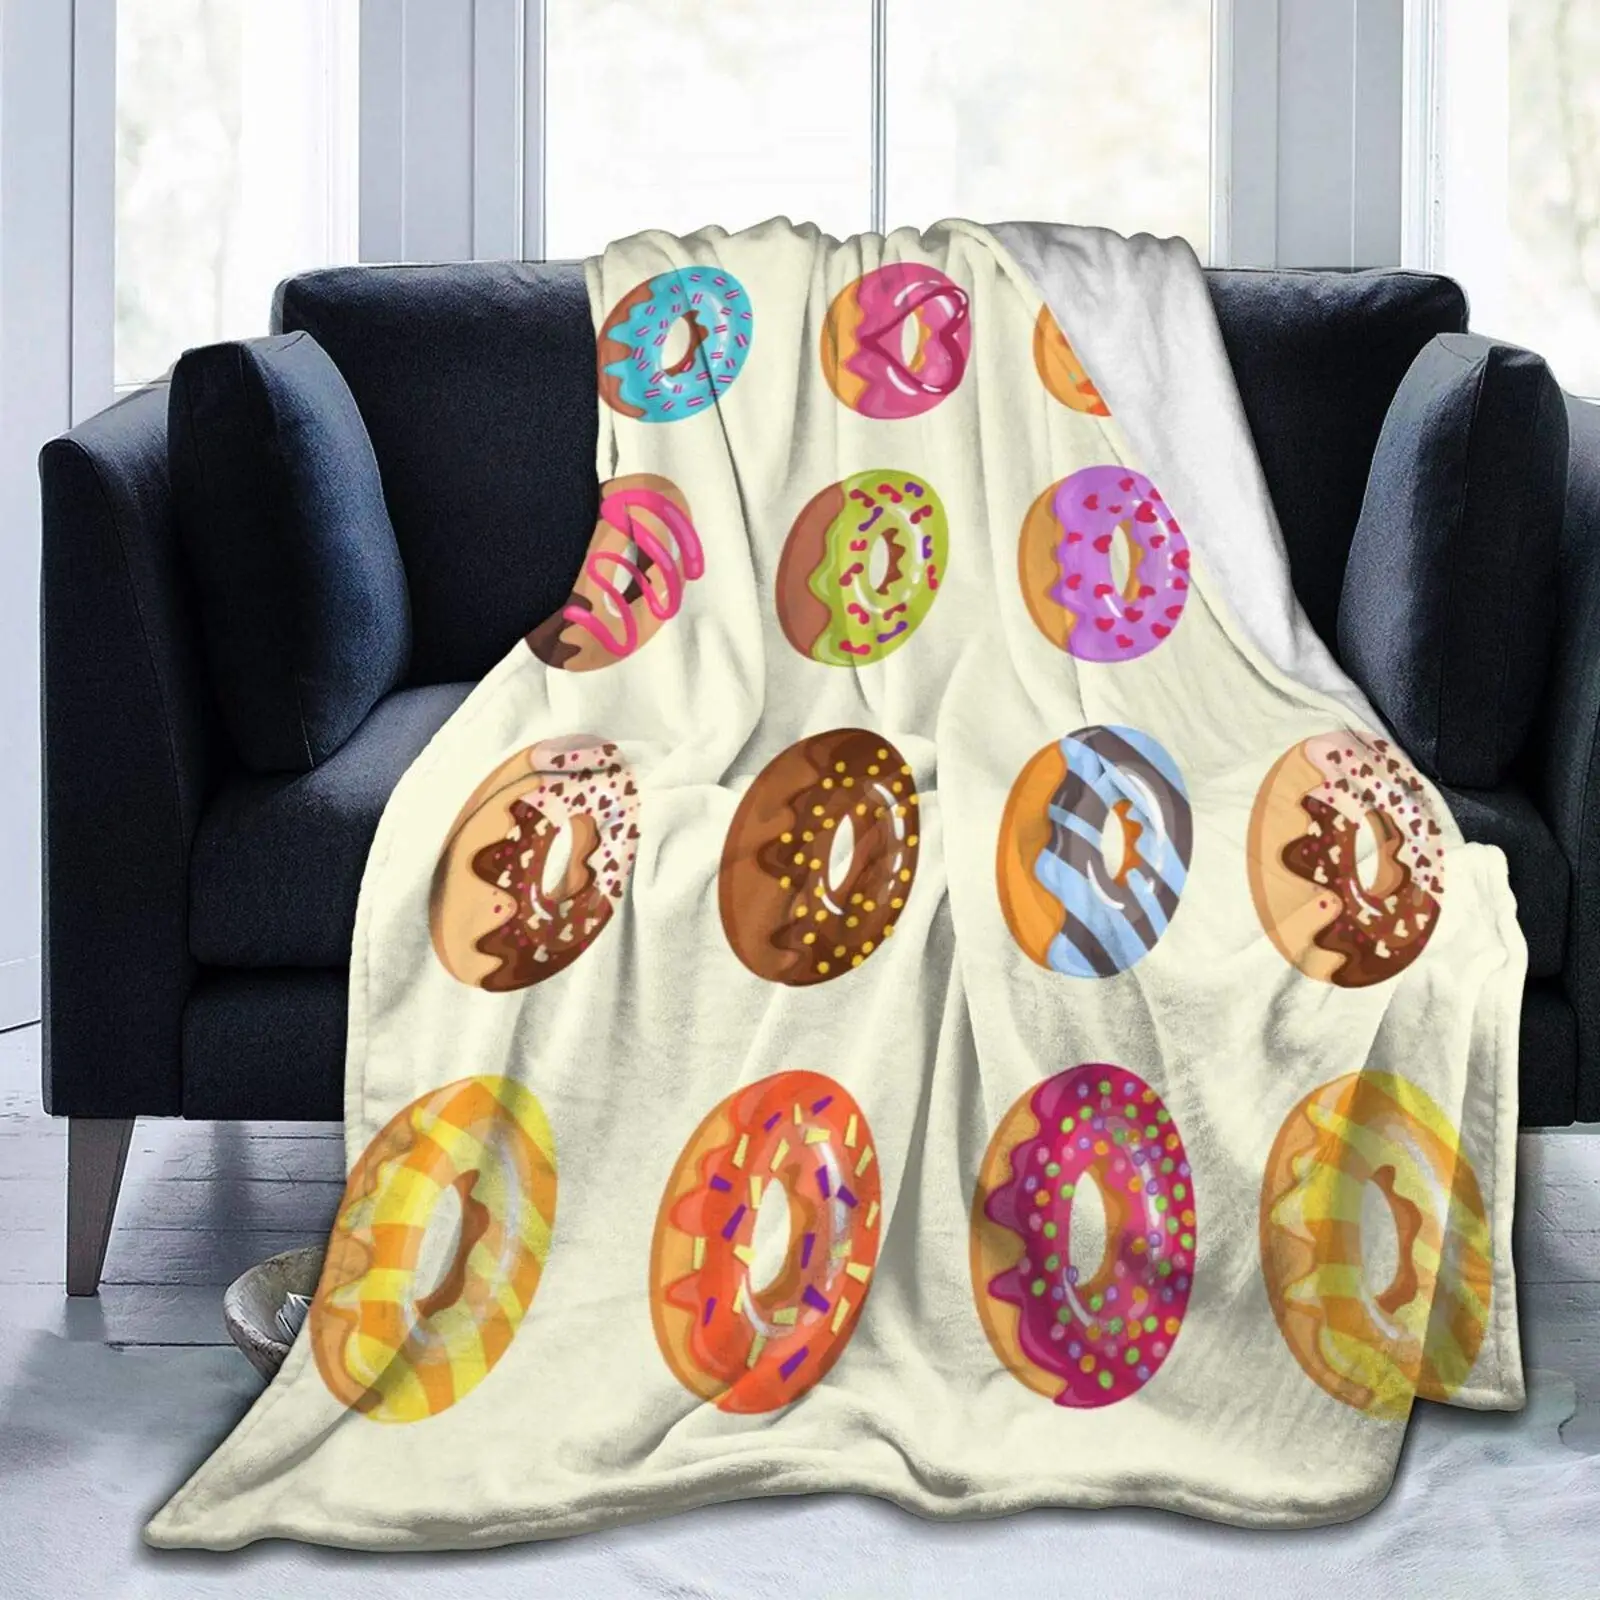 

Sweet Donuts Blanket,Flannel Throw Blanket Ultra Soft Micro Fleece Blanket Bed Couch Living Room 50"X40" for Baby